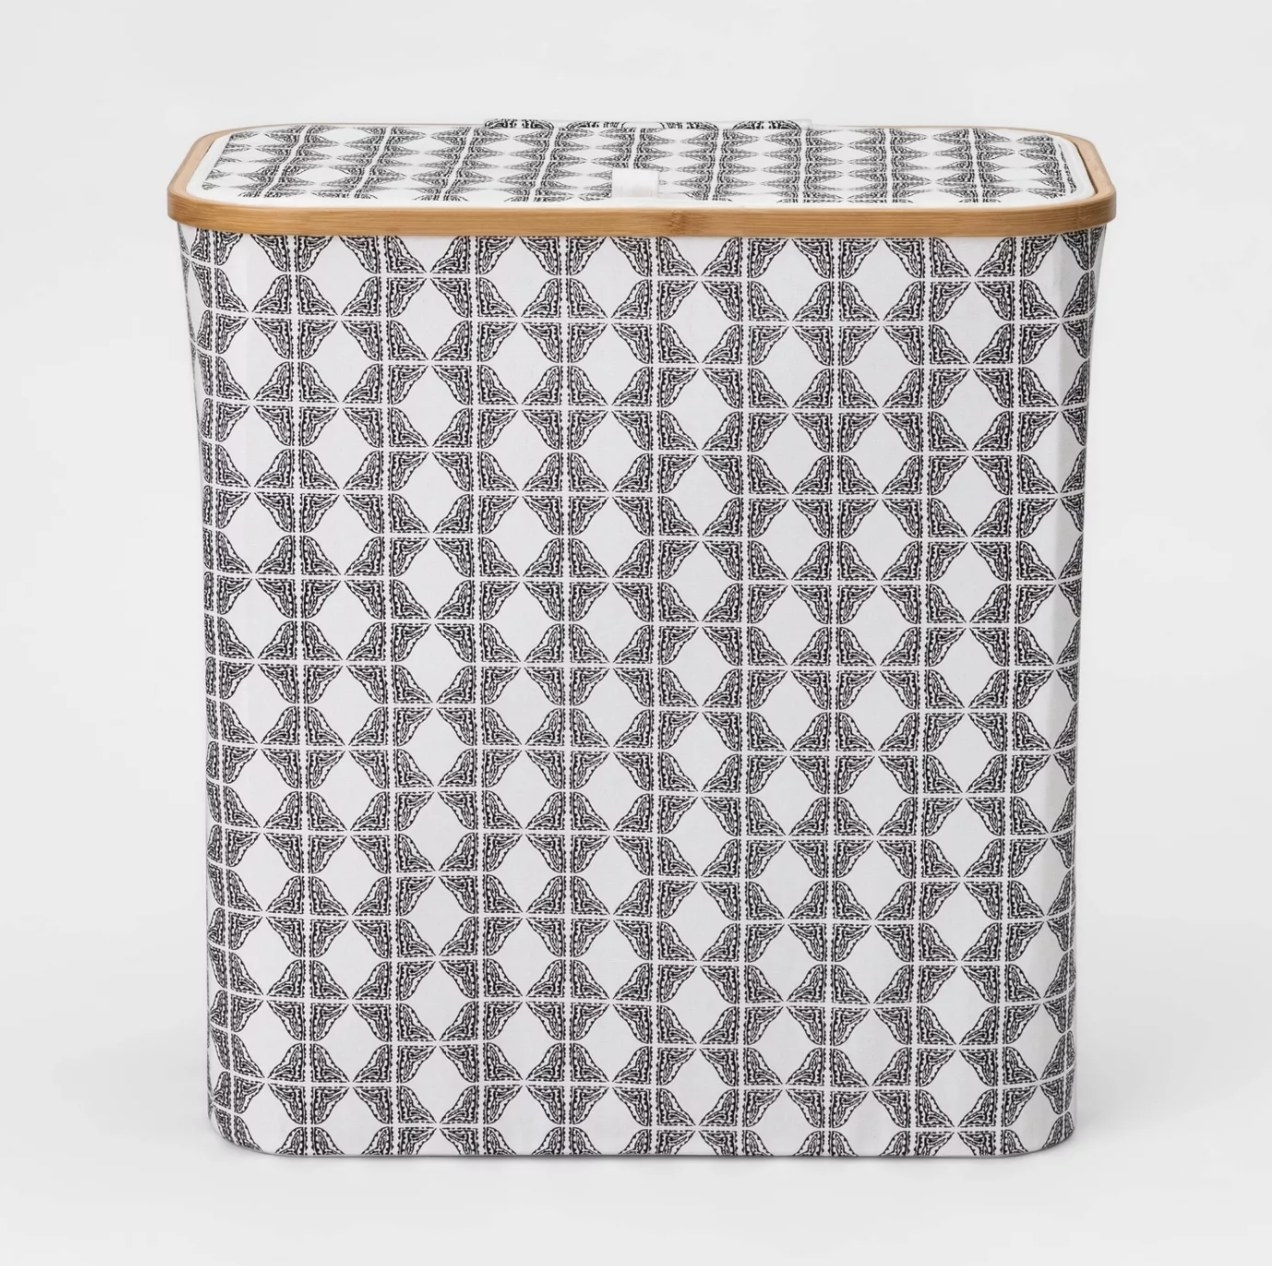 A wide hamper with a black-and-white pattern and a bamboo rim